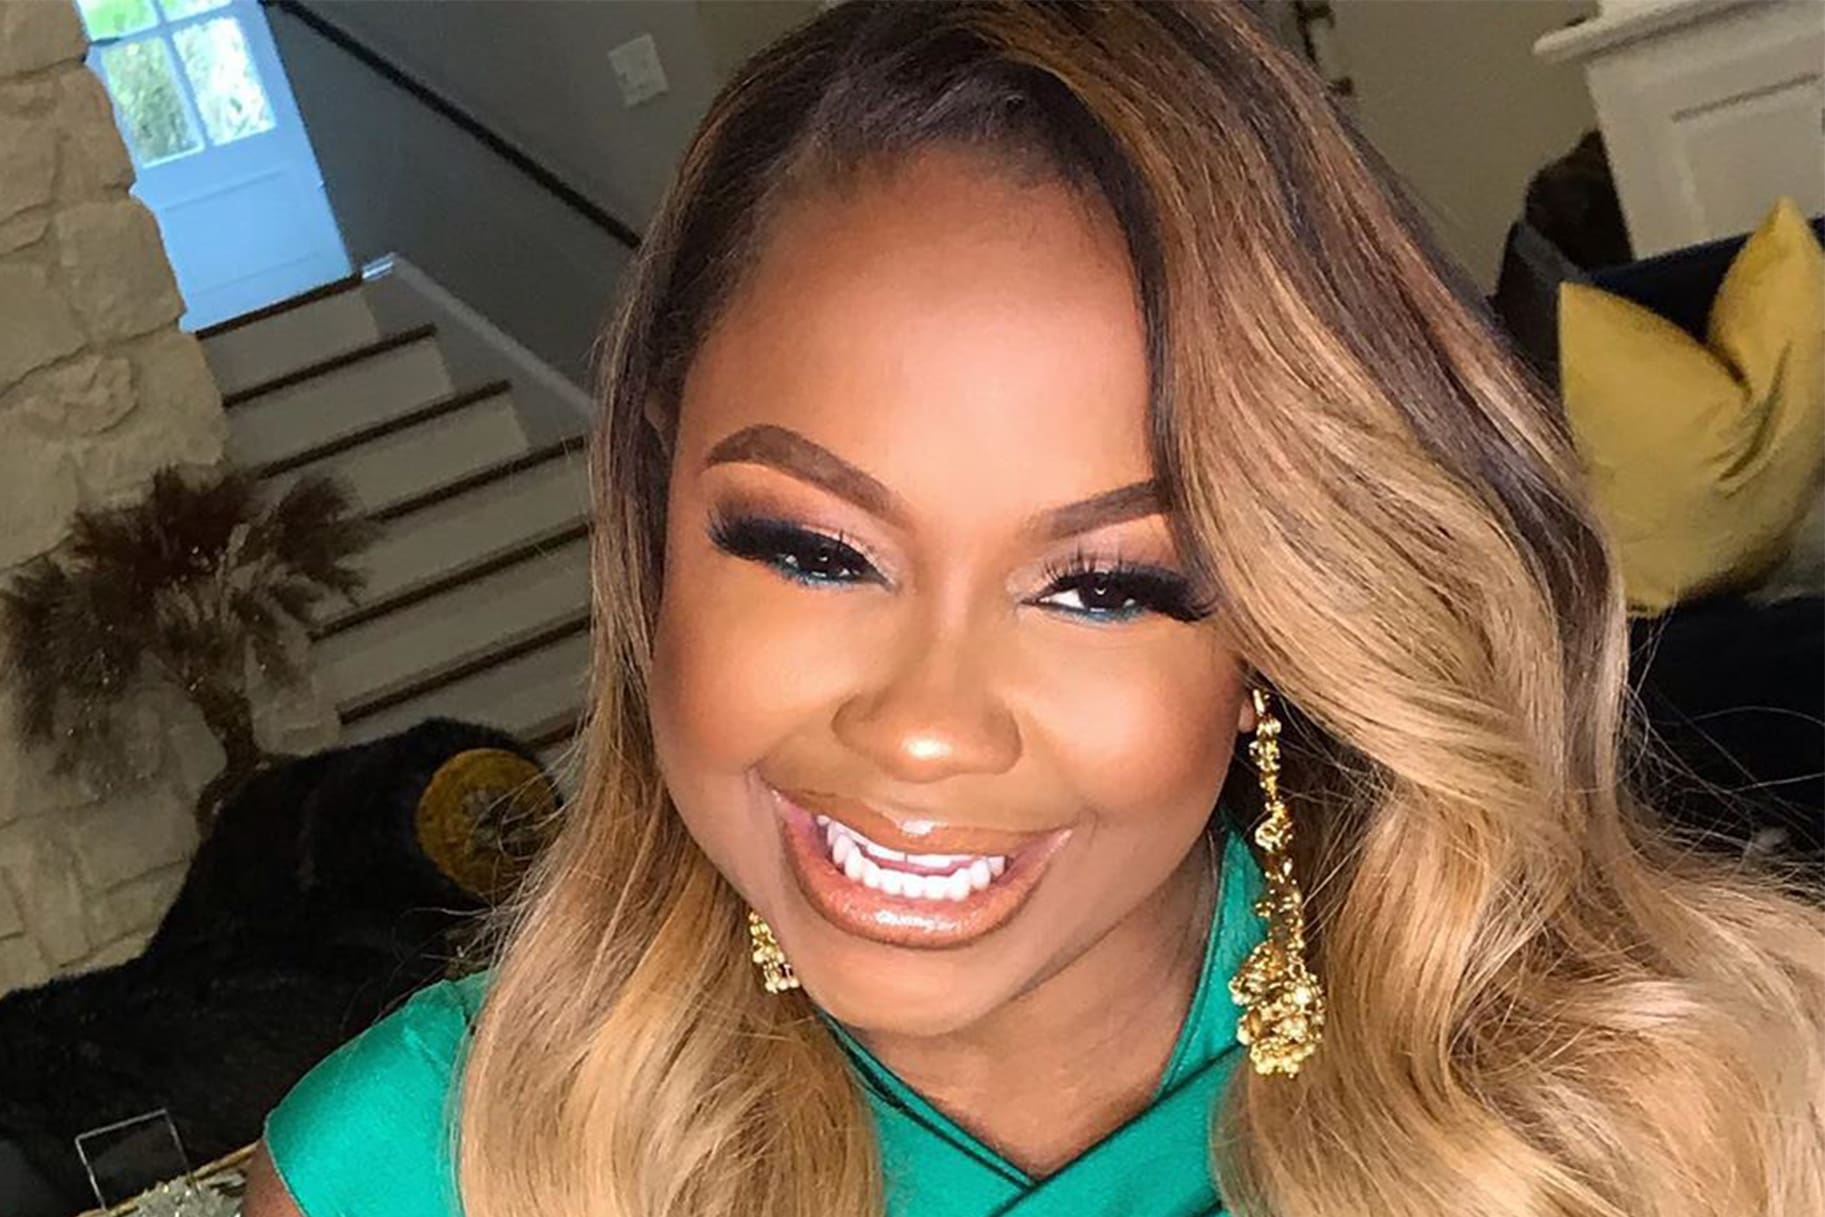 Phaedra Parks Looks Gorgeous For NYE - See Her All-Black Outfit